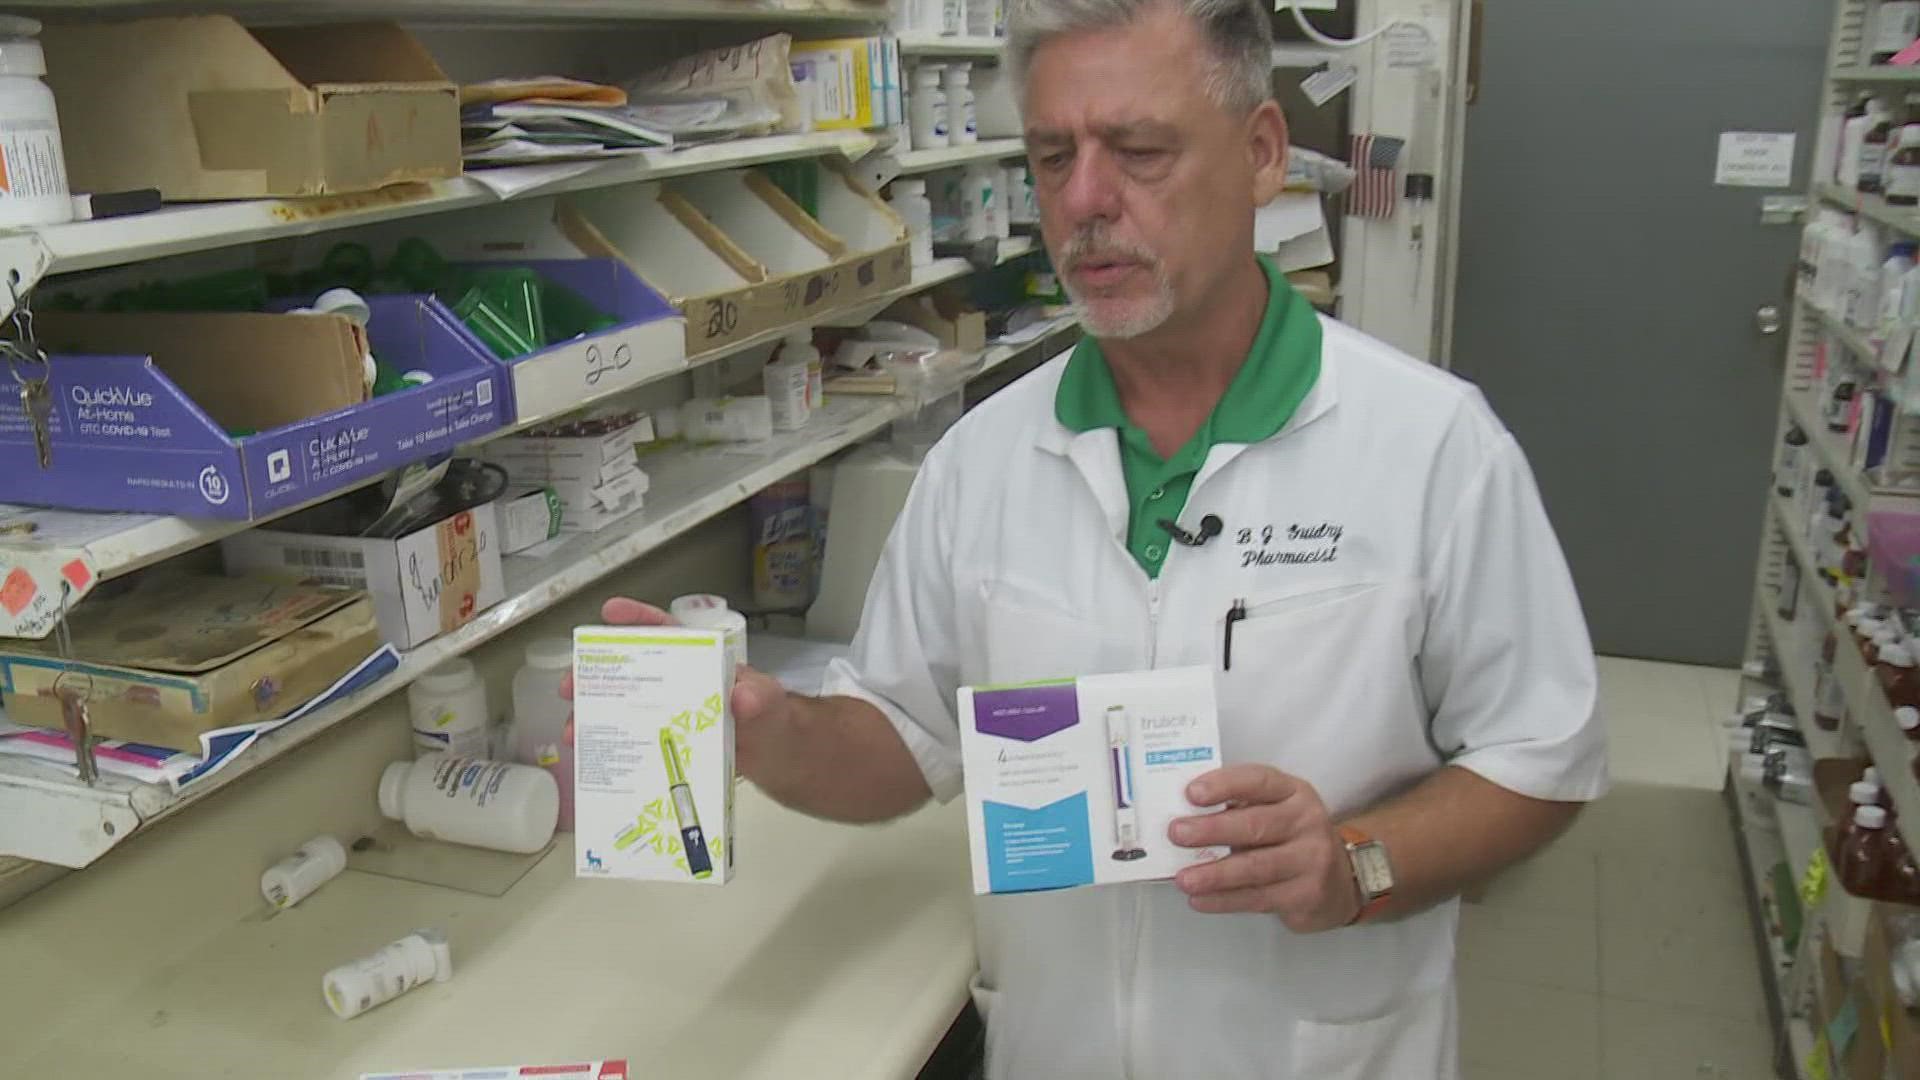 If you are having trouble finding your normal prescriptions at your local pharmacy, you aren't alone, Medical Reporter Meg Farris explains why.